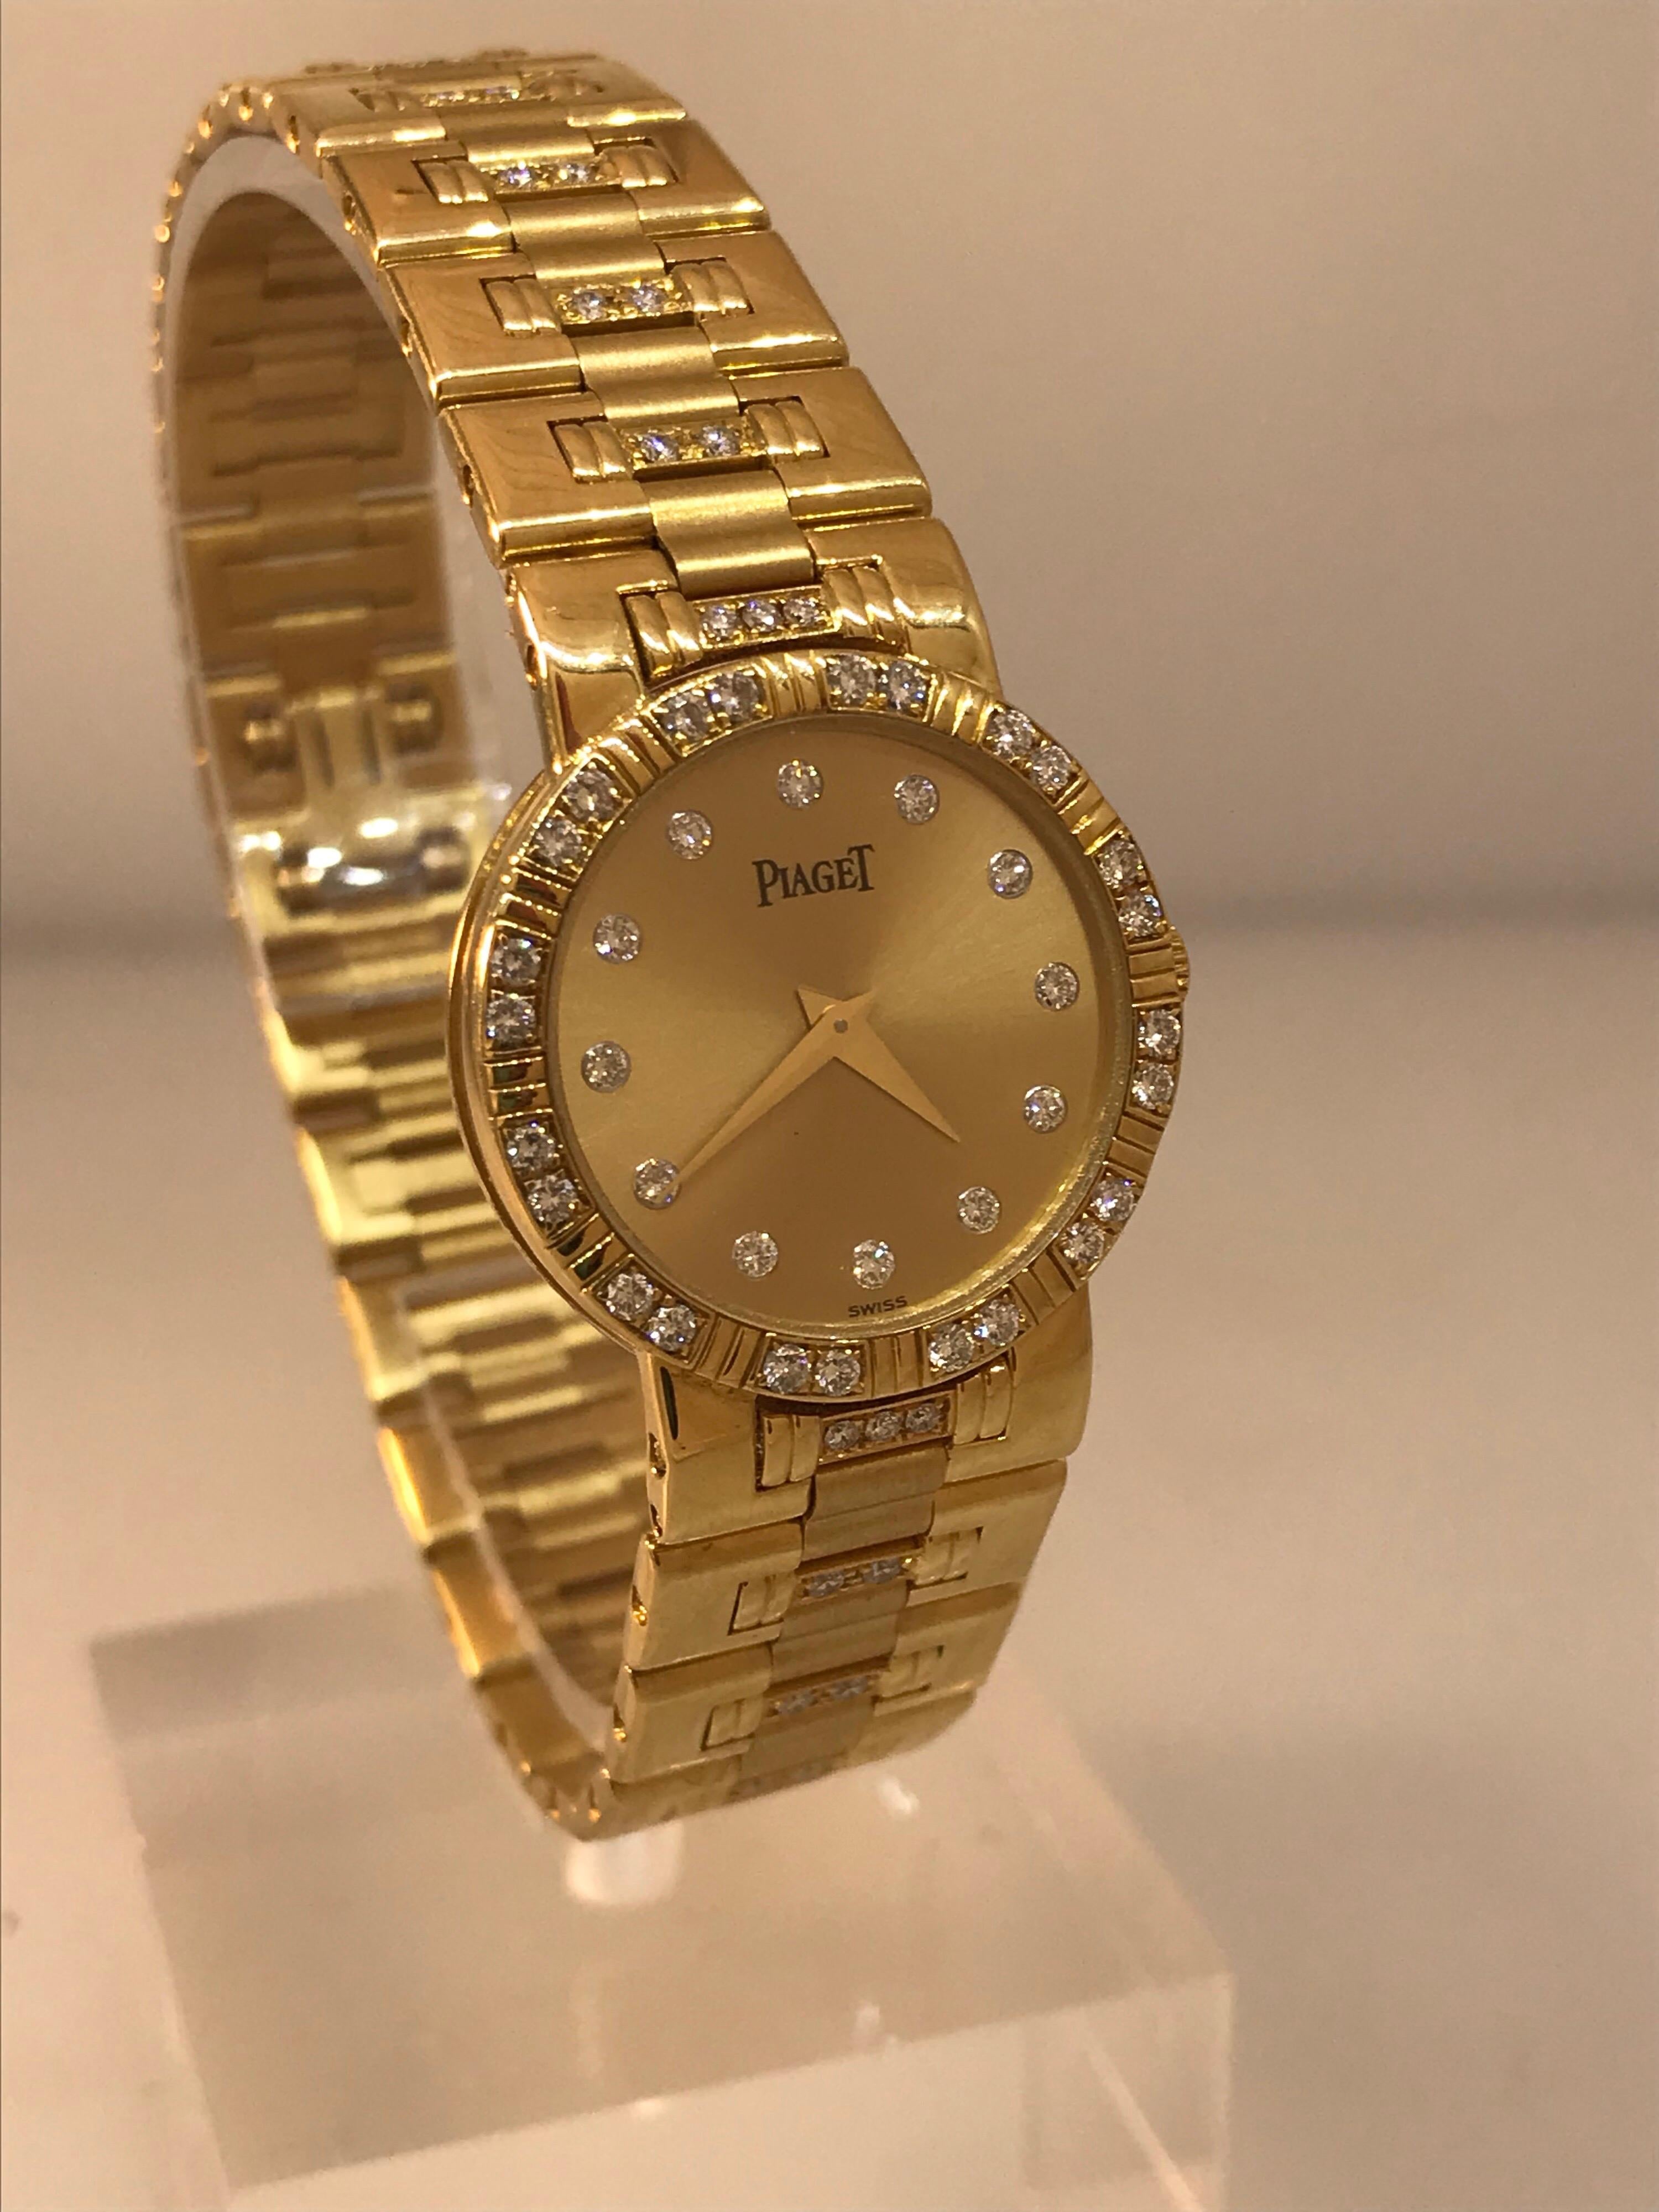 Piaget Dancer Ladies Watch

Model Number: 80564k818

100% Authentic

New / Old Stock

Comes with a generic watch box

18 Karat Yellow Gold Case & Bracelet

Diamond Bezel, Dial and Bracelet

Champagne Dial

Case Diameter: 23mm
